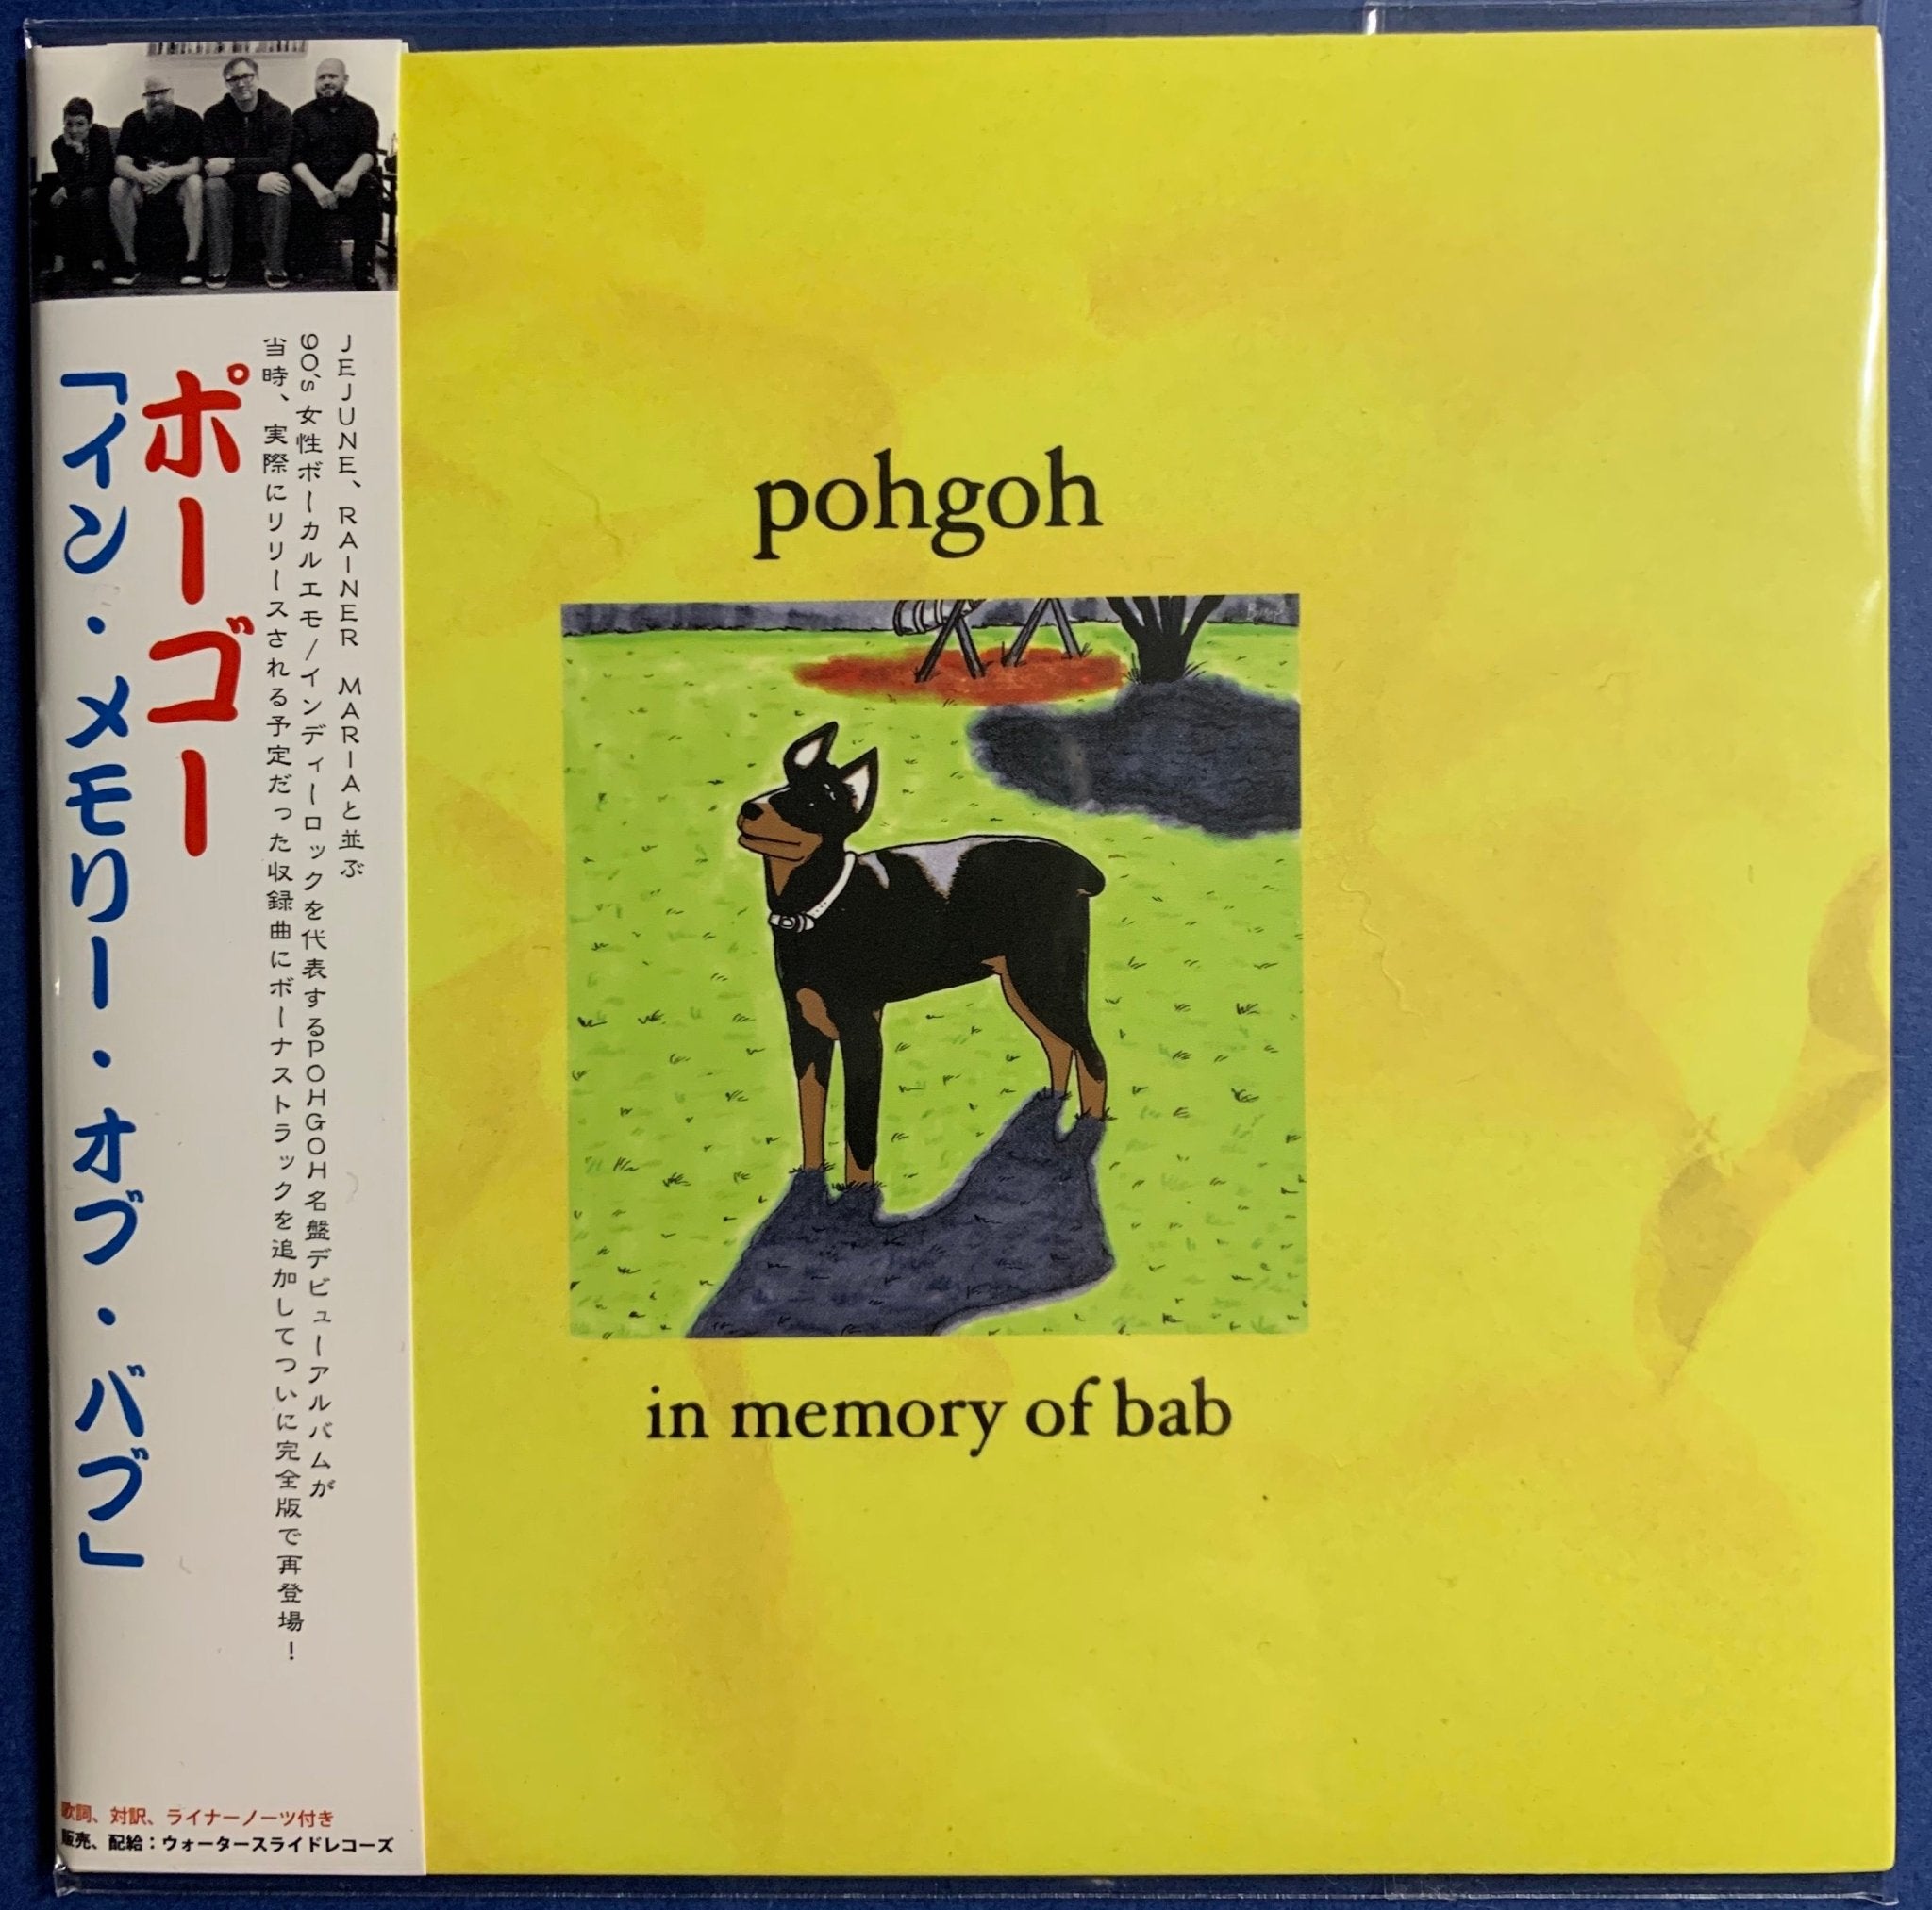 Pohgoh: In Memory of Bab: CD (Japanese Import) - Steadfast Records